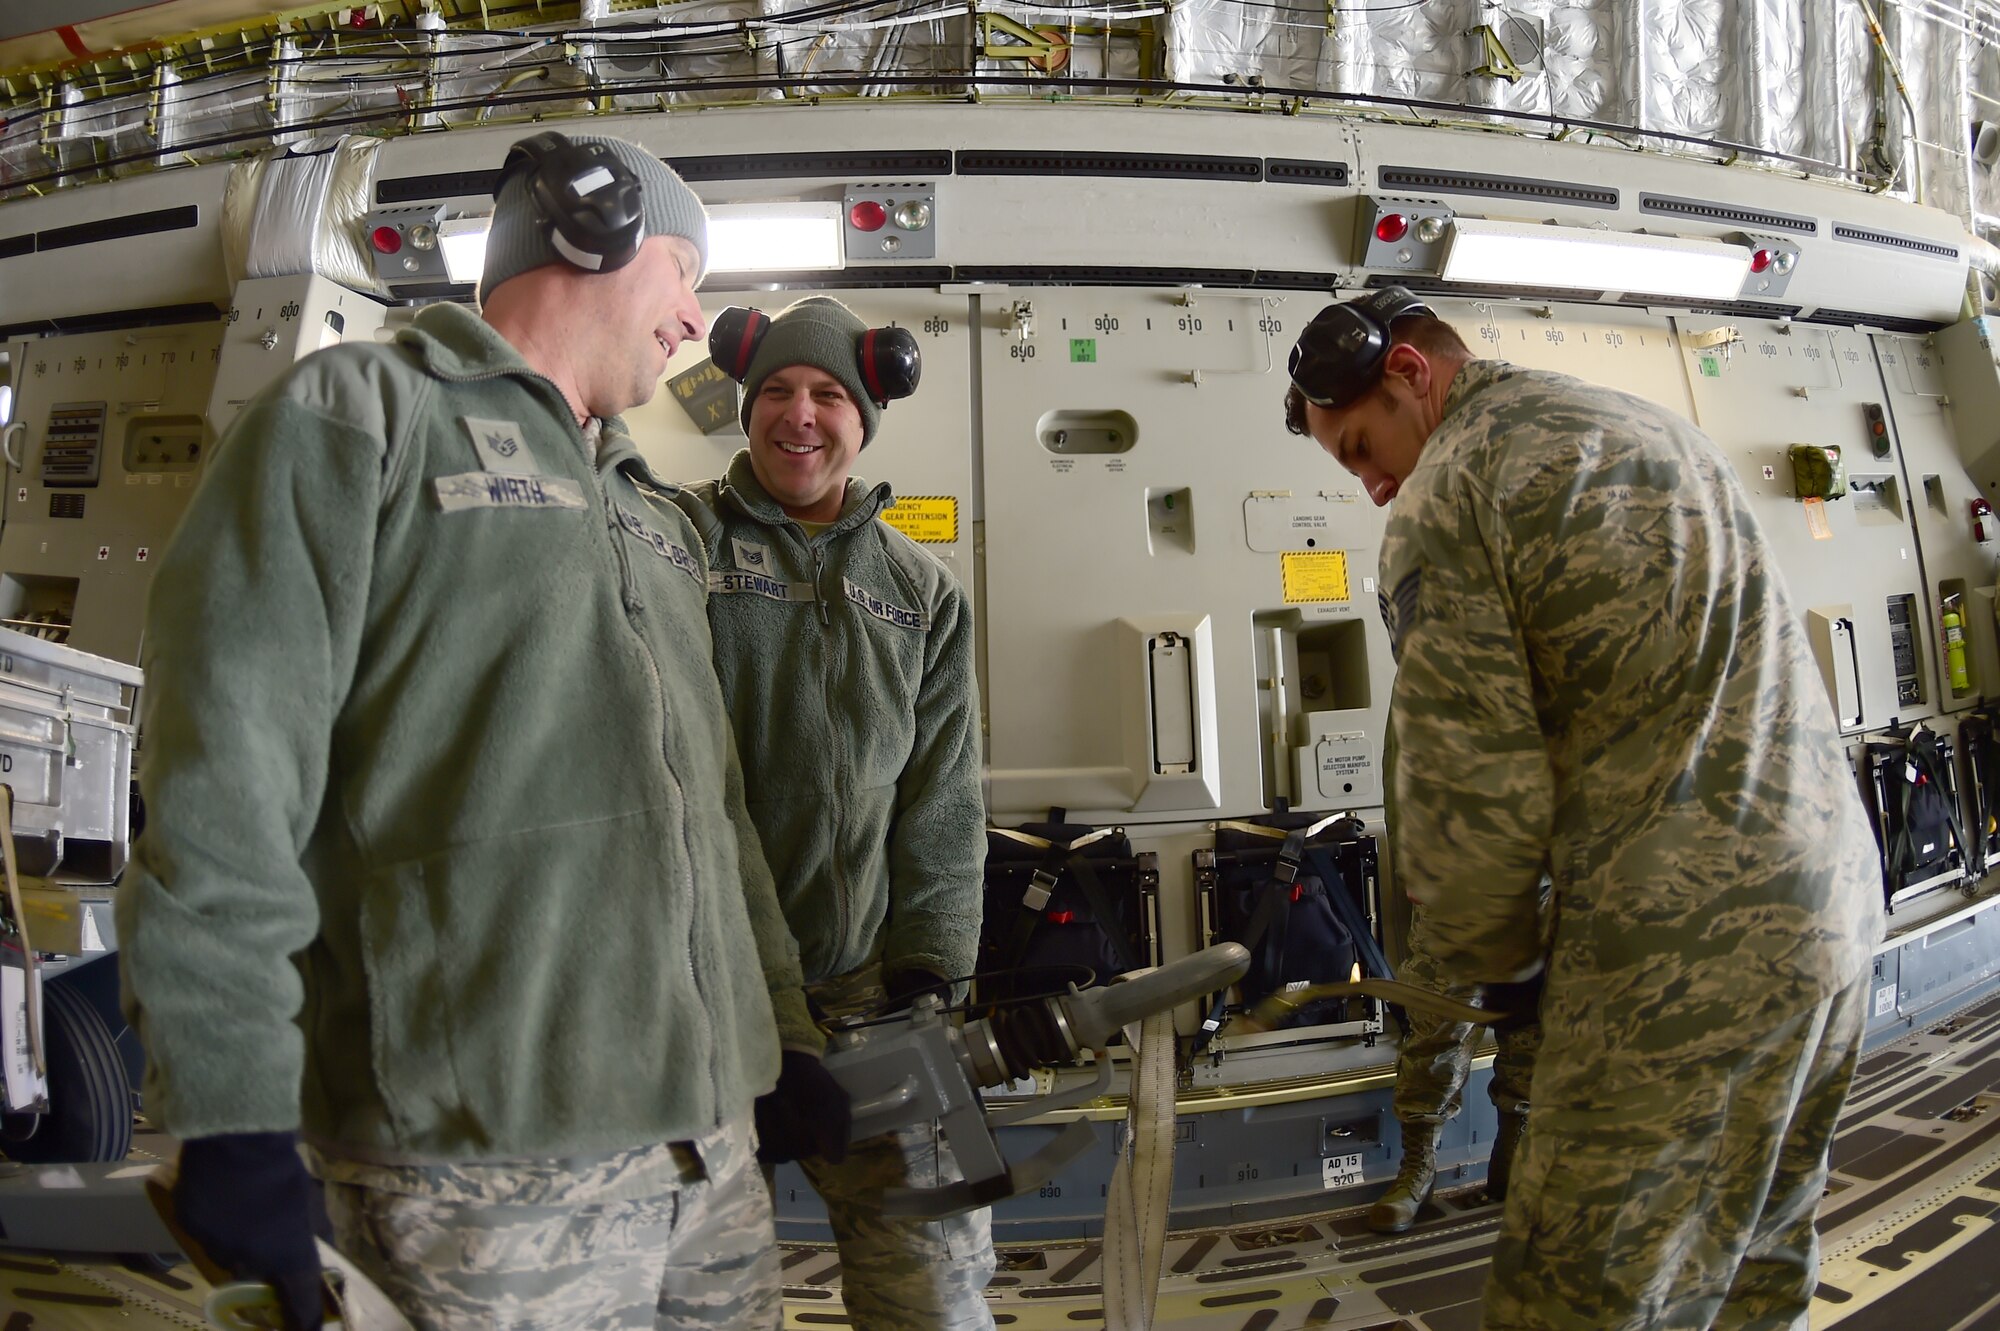 (left) Staff Sgt. Peter Wirth, 140th Maintenance Squadron equipment maintenance technician, Tech. Sgt. Alex Stewart, 140th MXS aerospace ground equipment mechanic and Tech Sgt. Garrett Fintel, 140th MXS munitions technician, assist in loading a C-17 Globemaster III March 15, 2016, on Buckley Air Force Base, Colo. The aircraft, assigned to the 172nd Airlift Wing, Jackson, Mississippi, supported the 140th Wing transport equipment to Tyndall AFB, Florida, for an exercise. (U.S. Air Force photo by Airman 1st Class Luke W. Nowakowski/Released)